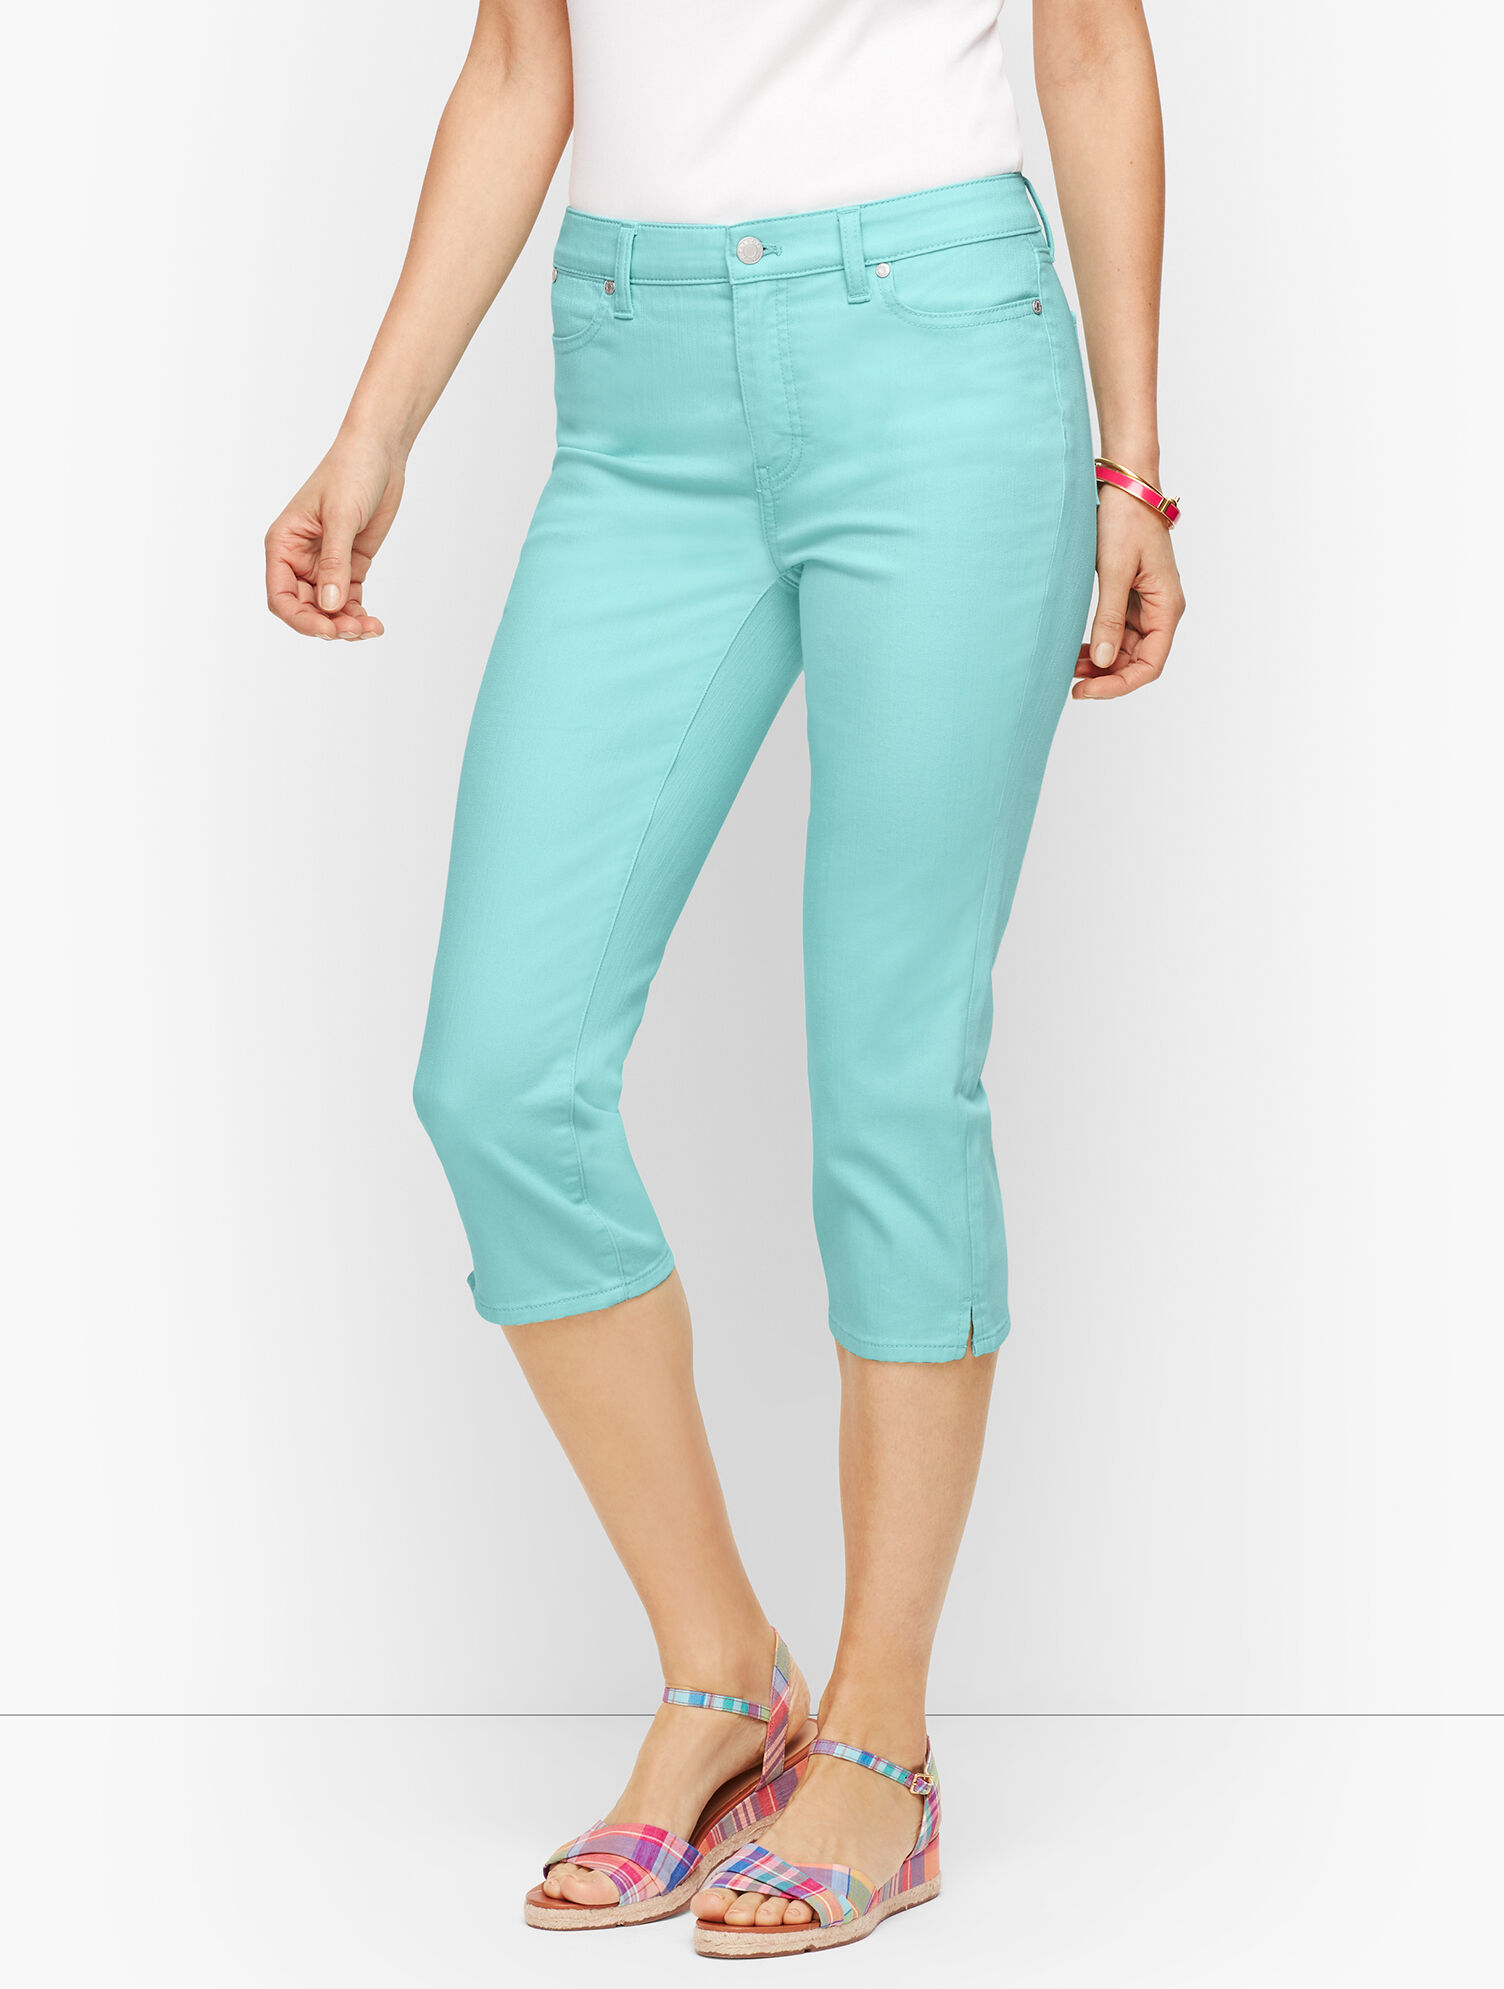 Pedal Pusher Jeans | Talbots